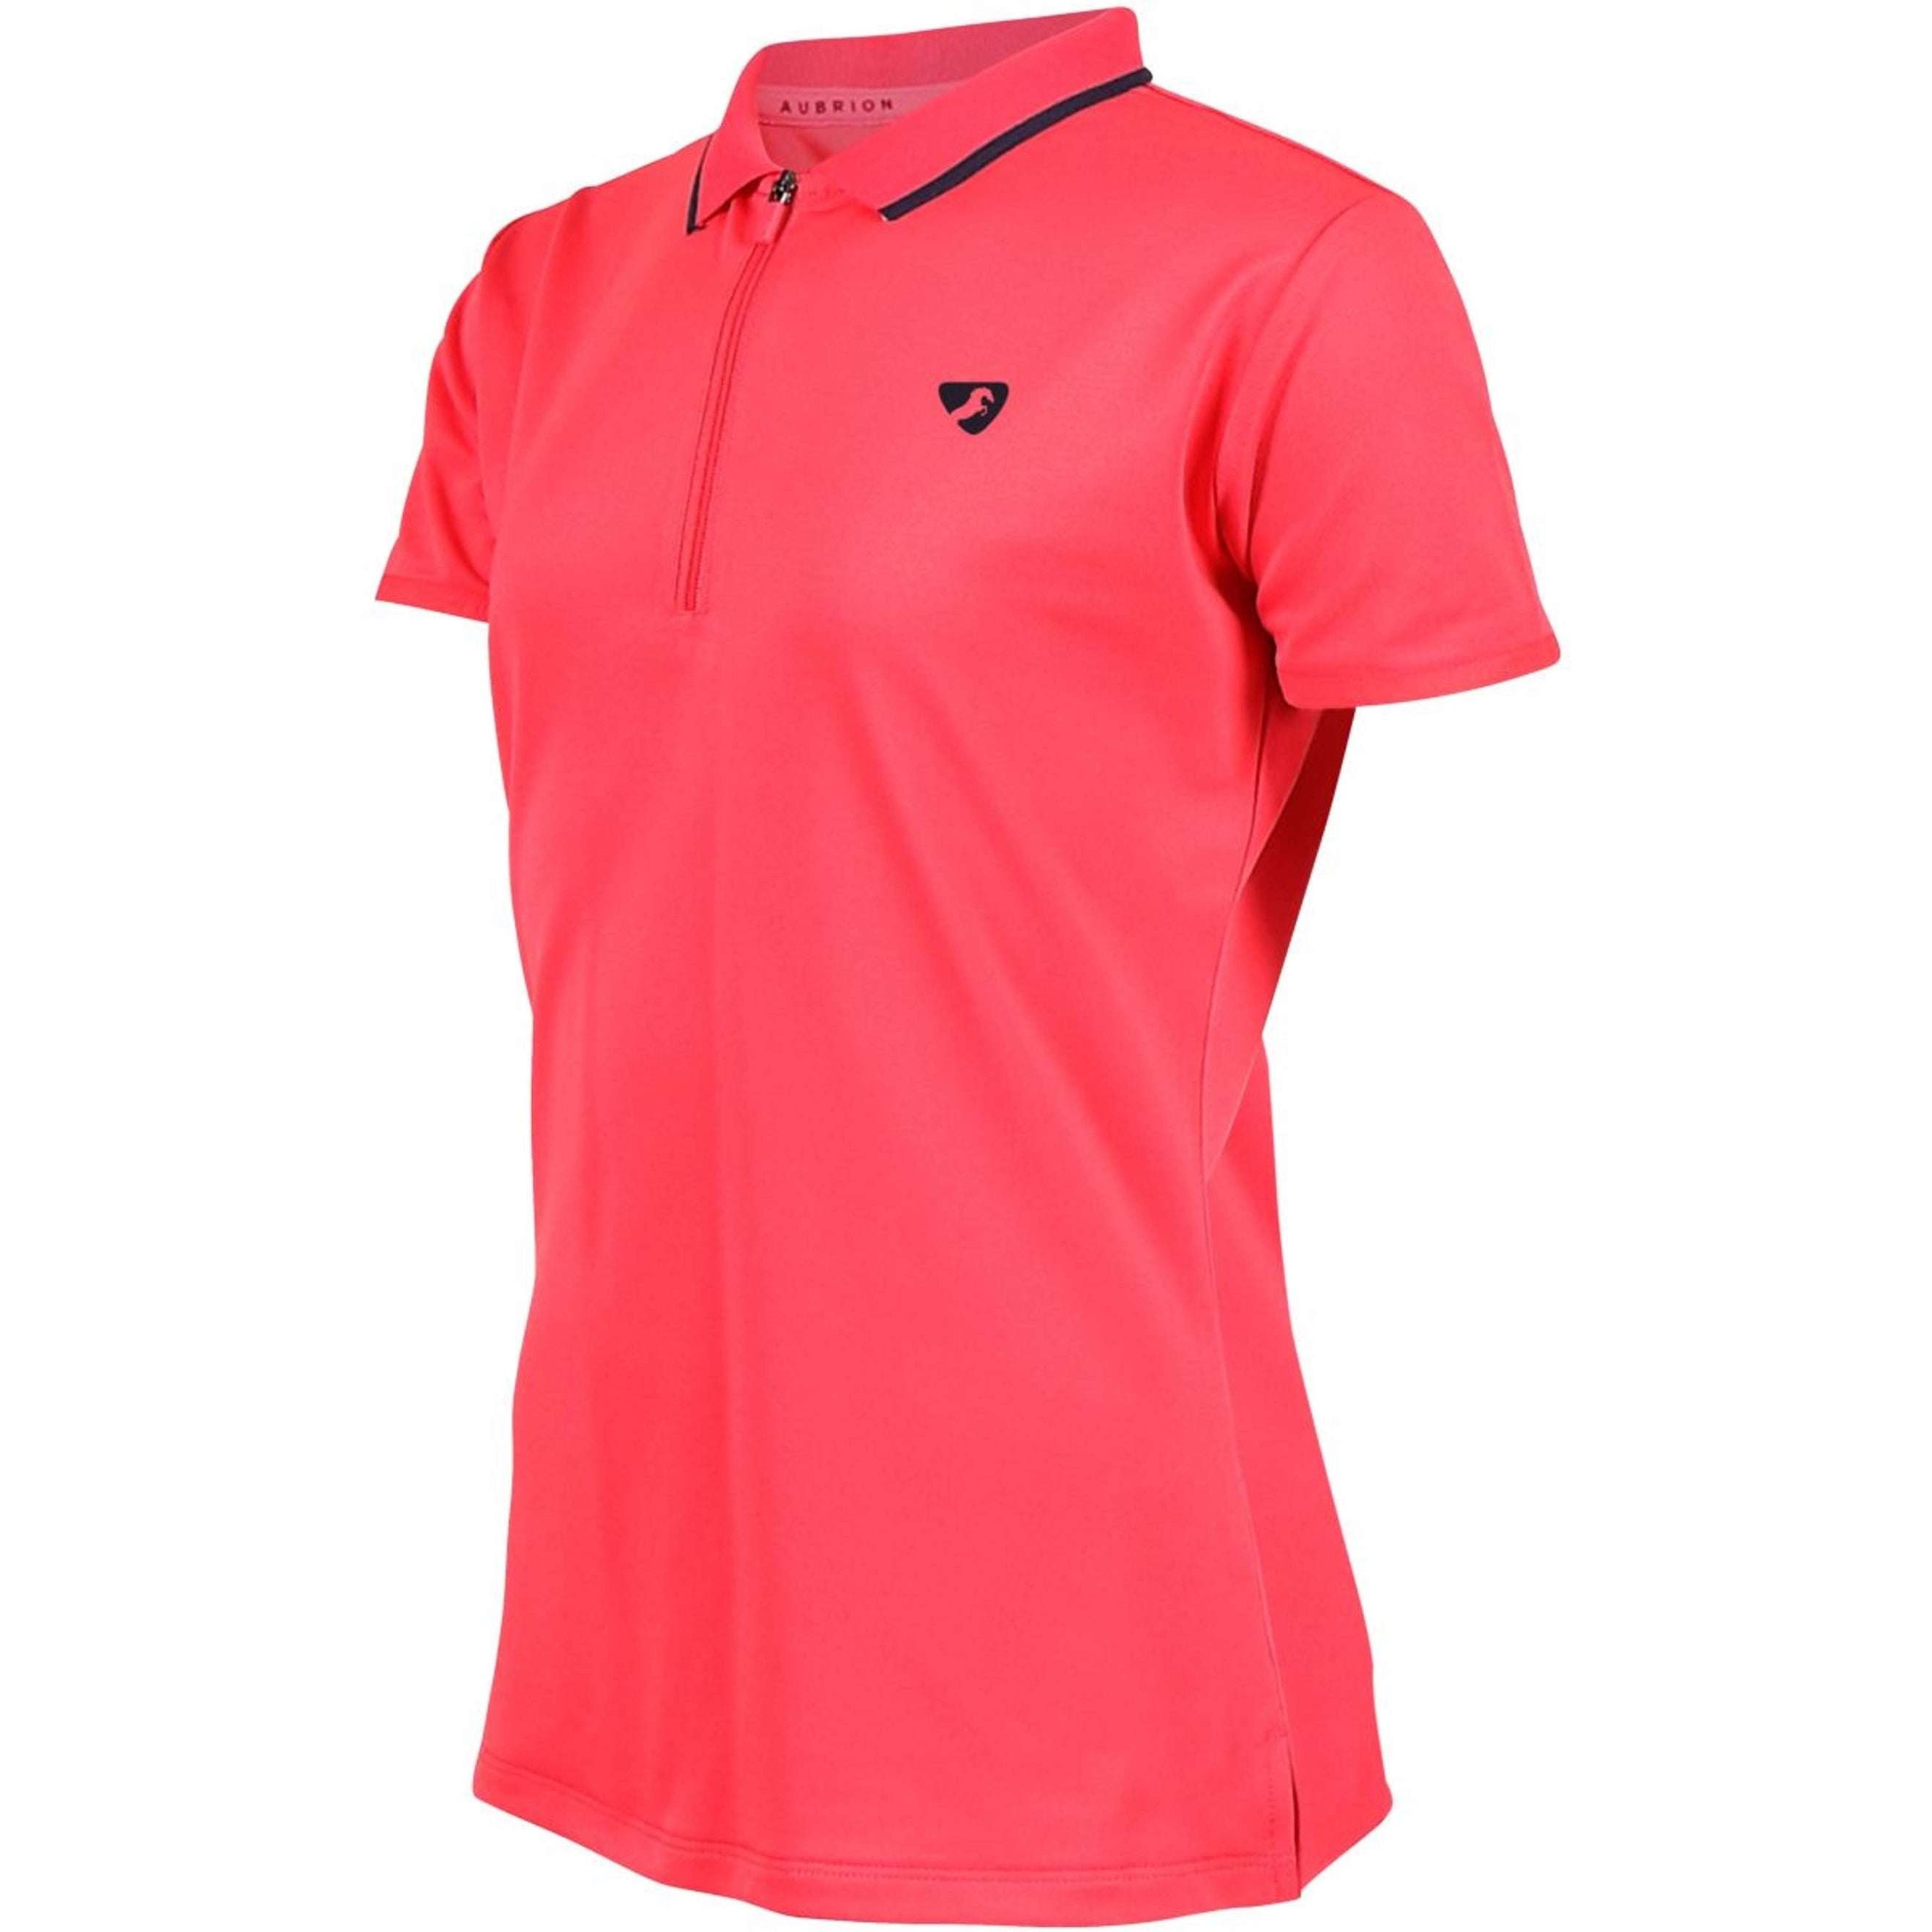 Aubrion Polo Poise Tech Young Rider Corail